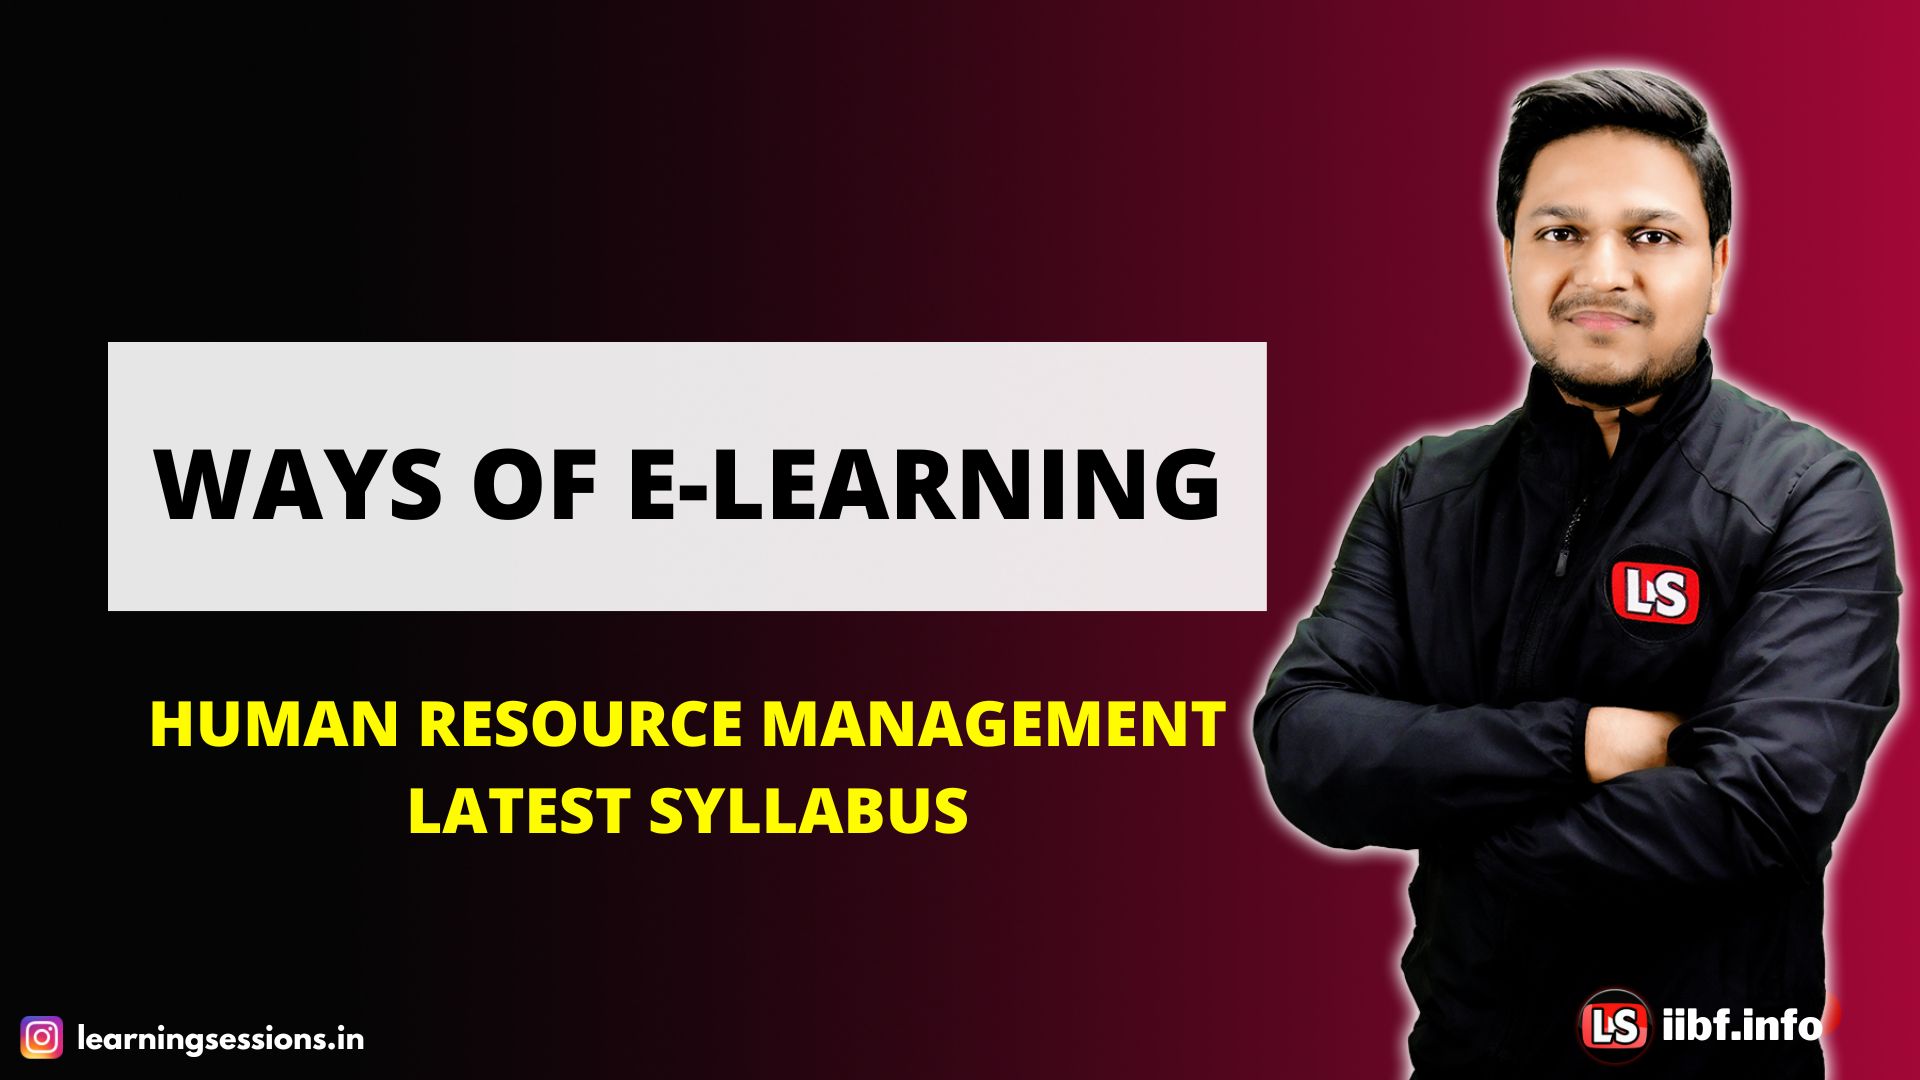 CAIIB HUMAN RESOURCE MANAGEMENT | DEVELOPING COMPETENCIES THROUGH E-LEARNING | LATEST SYLLABUS & NOTES 2022